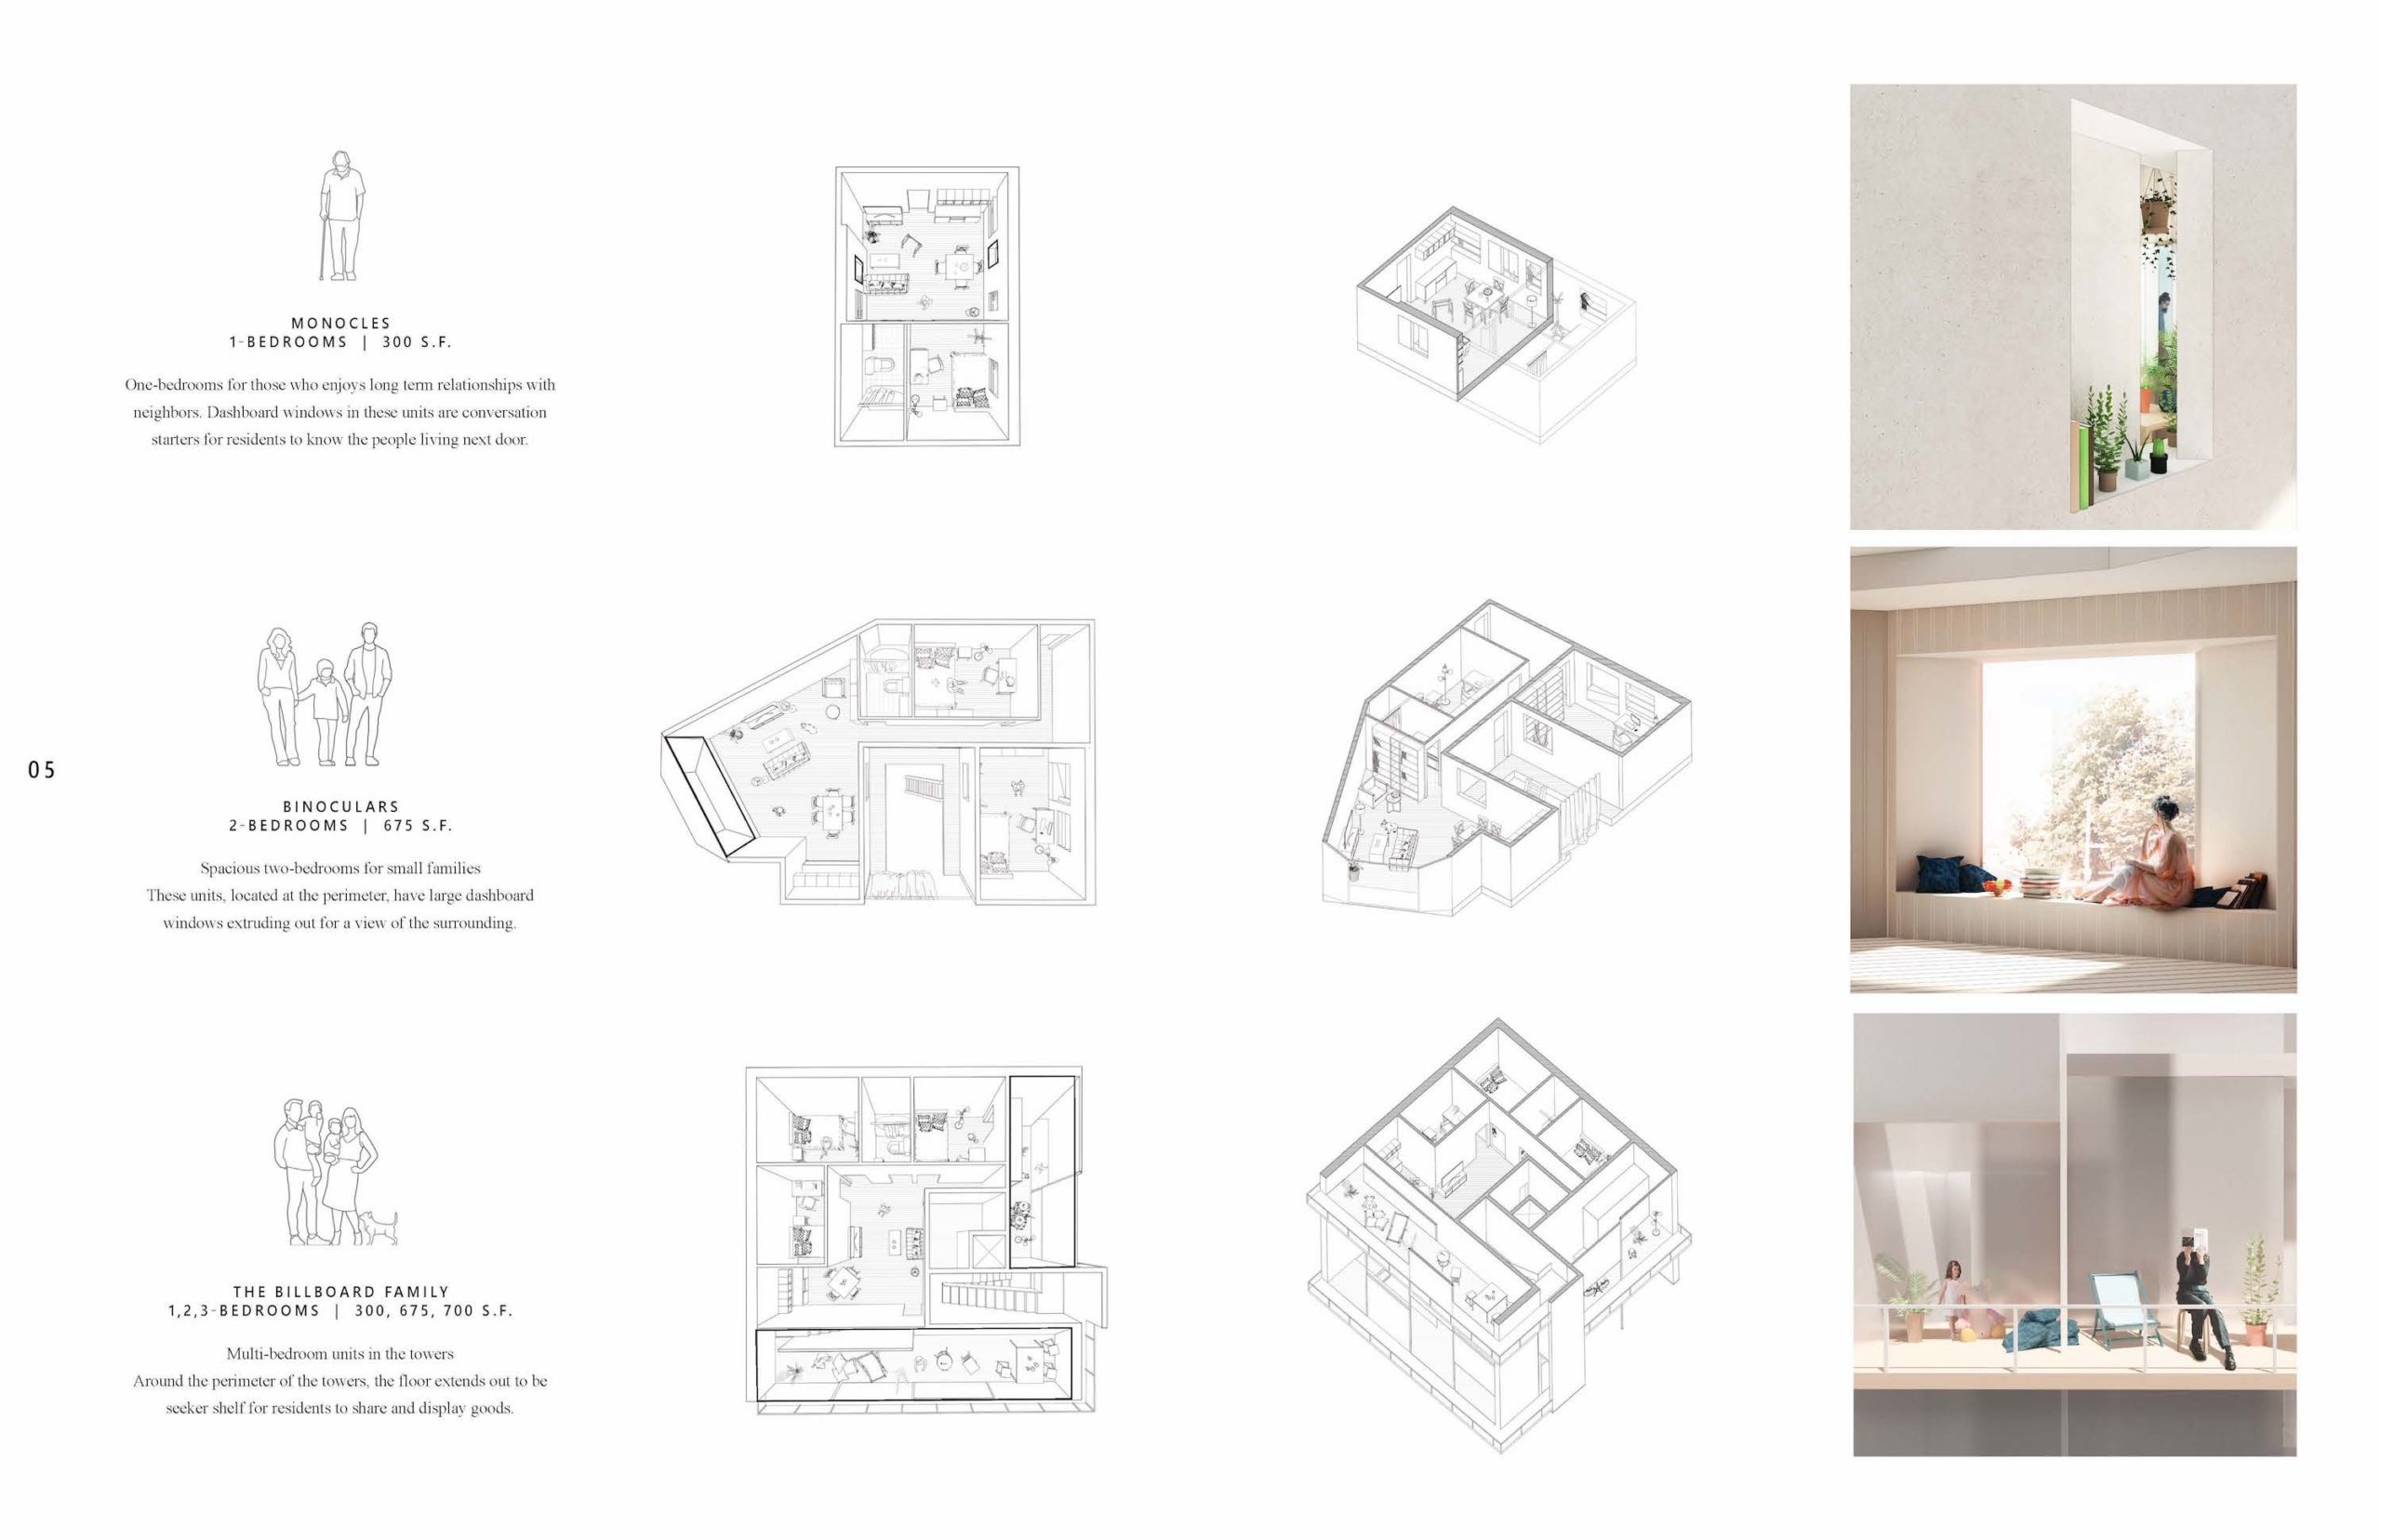 plans and interior renderings of 1, 2, and 3 bedroom units